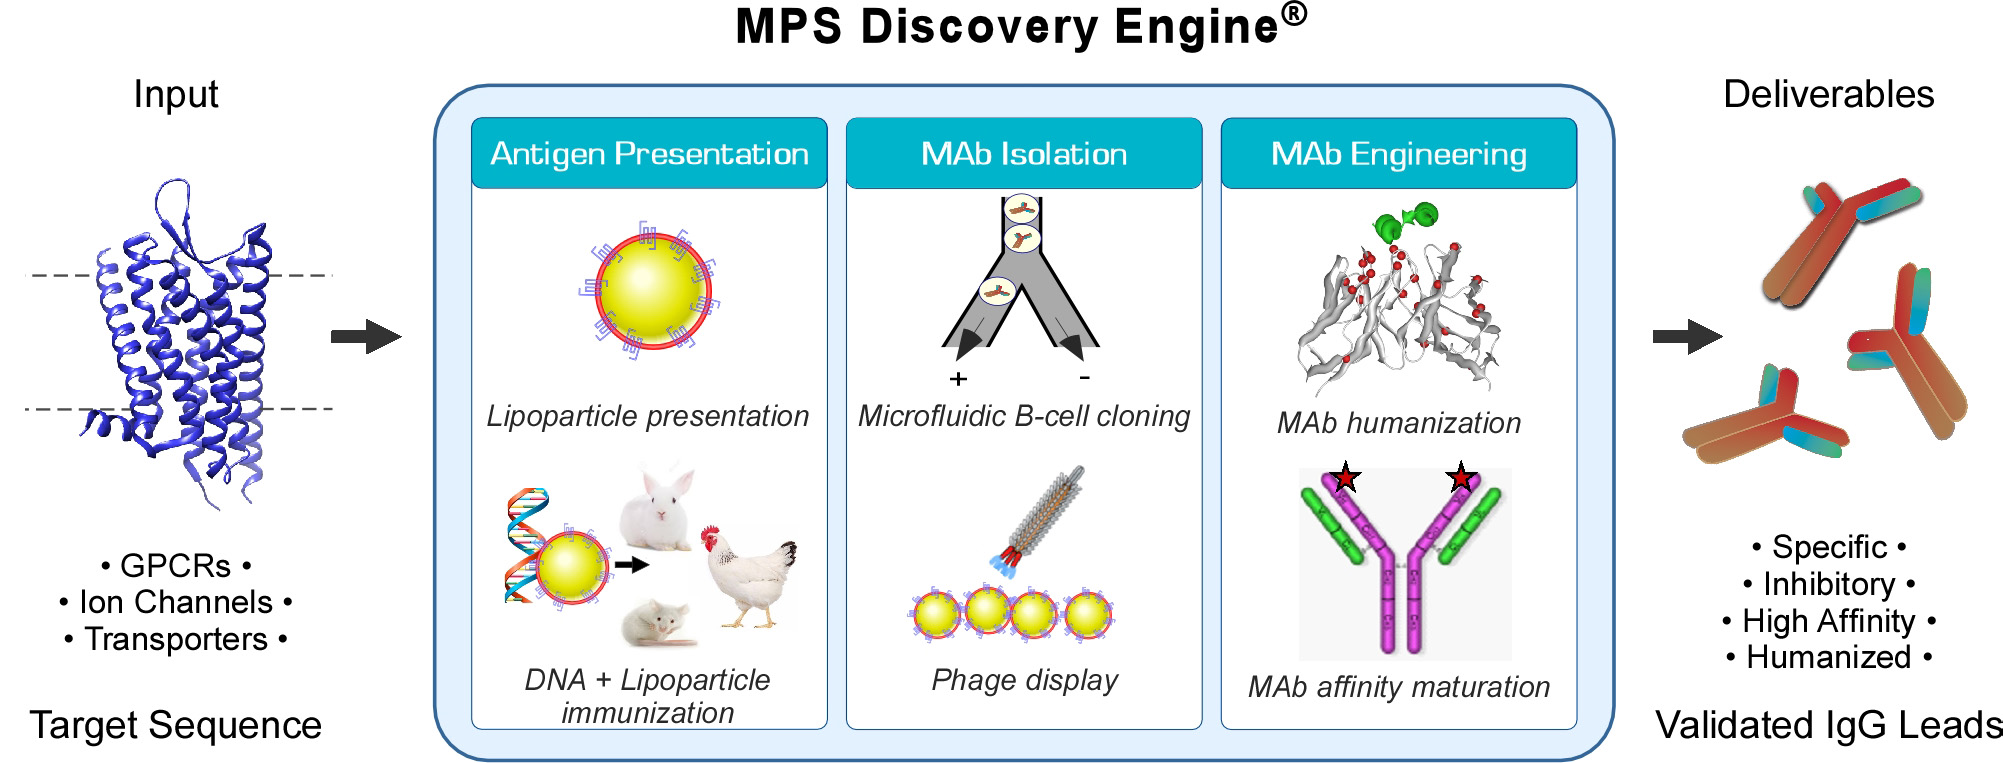 The MPS Discovery Engine